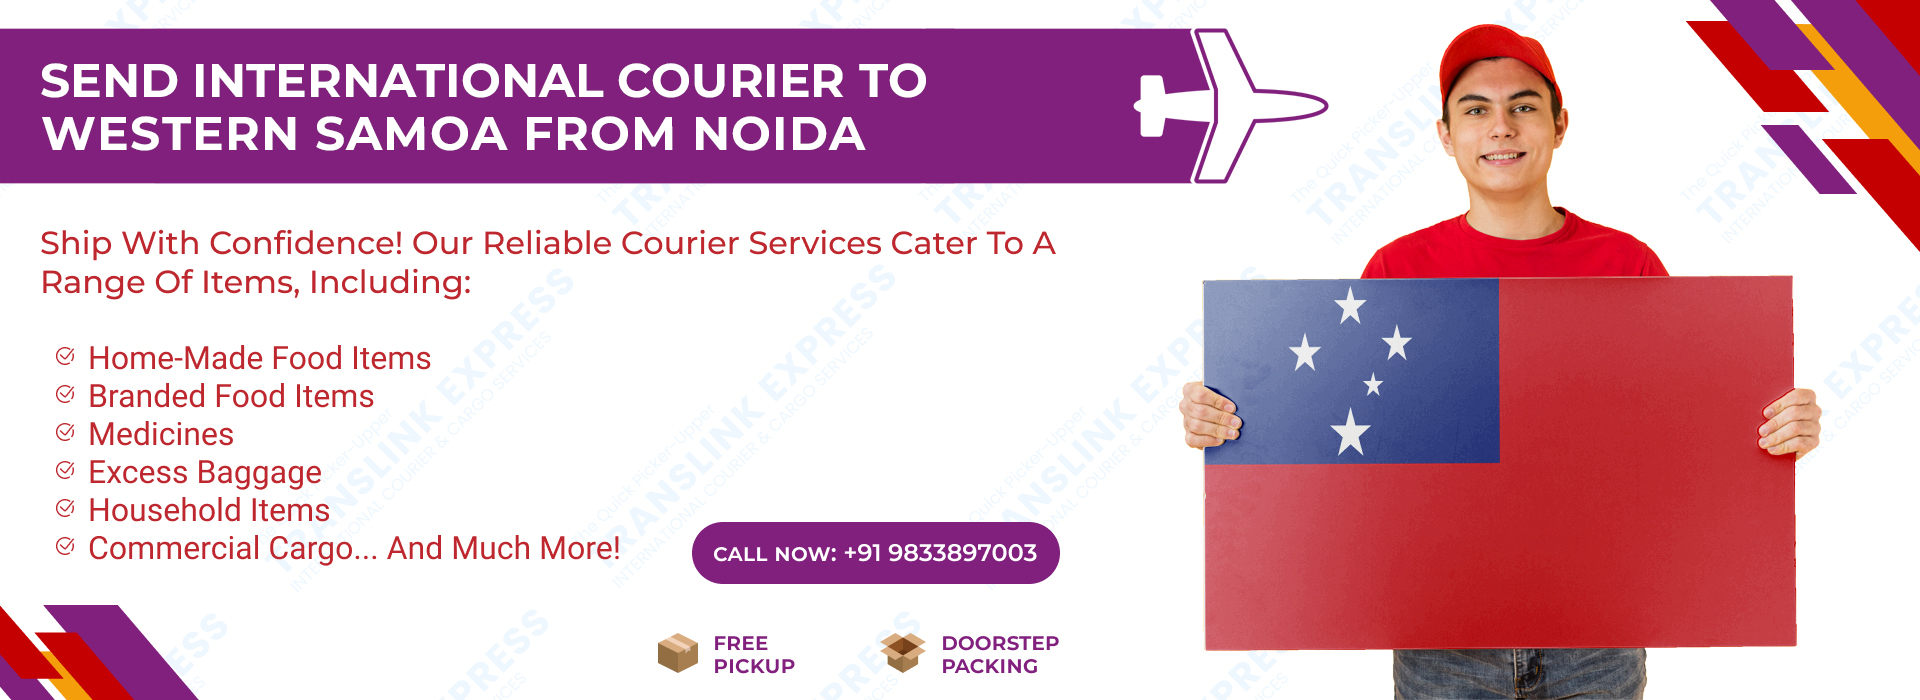 Courier to Western Samoa From Noida